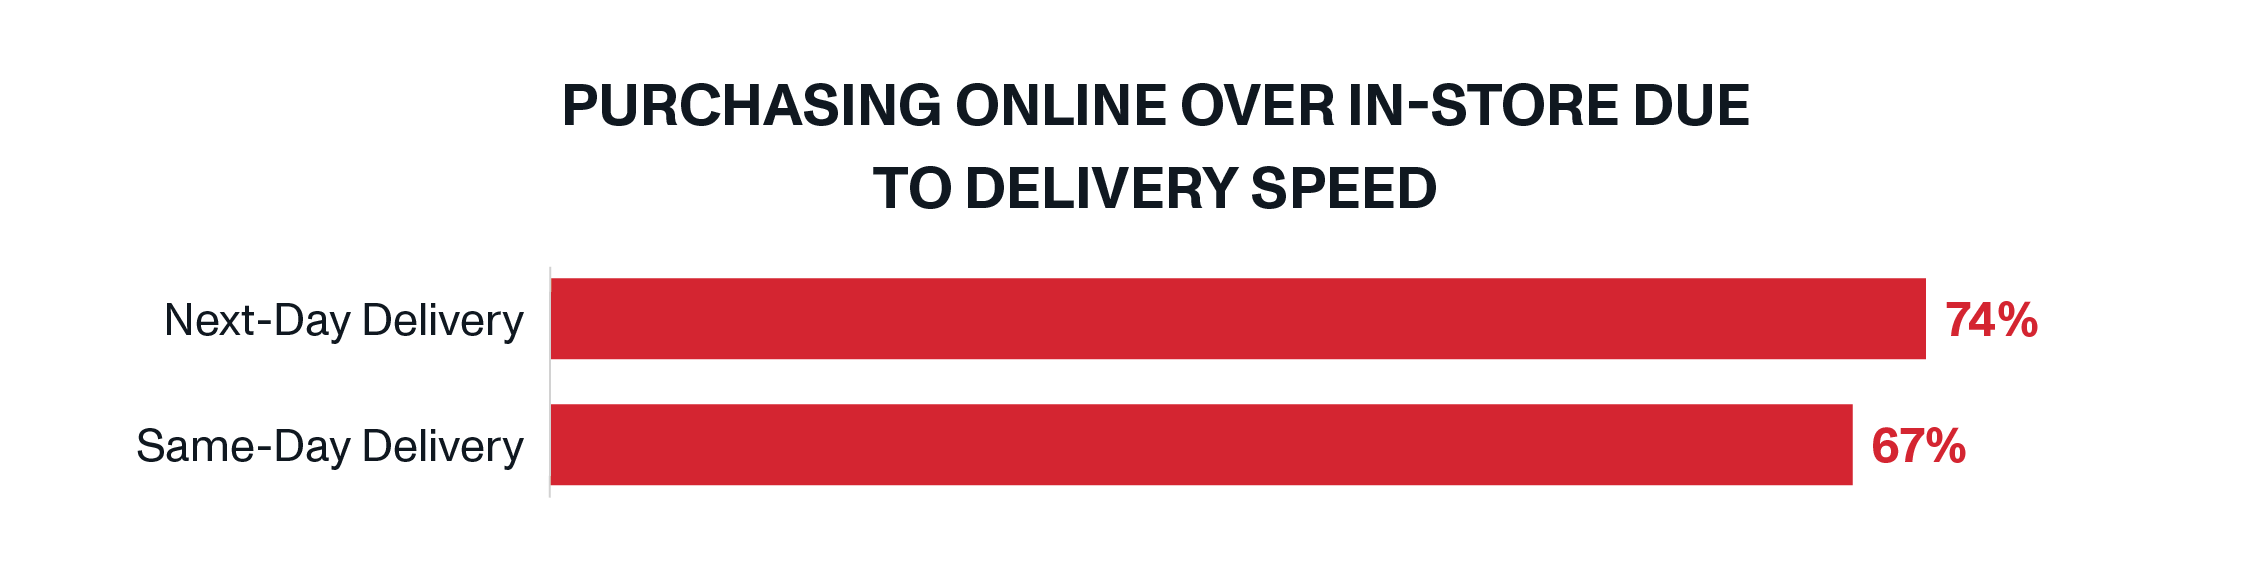 https://www.ontrac.com/wp-content/uploads/2023/10/Purchasing-Online-Over-In-Store-Due-to-Delivery-Speed.png